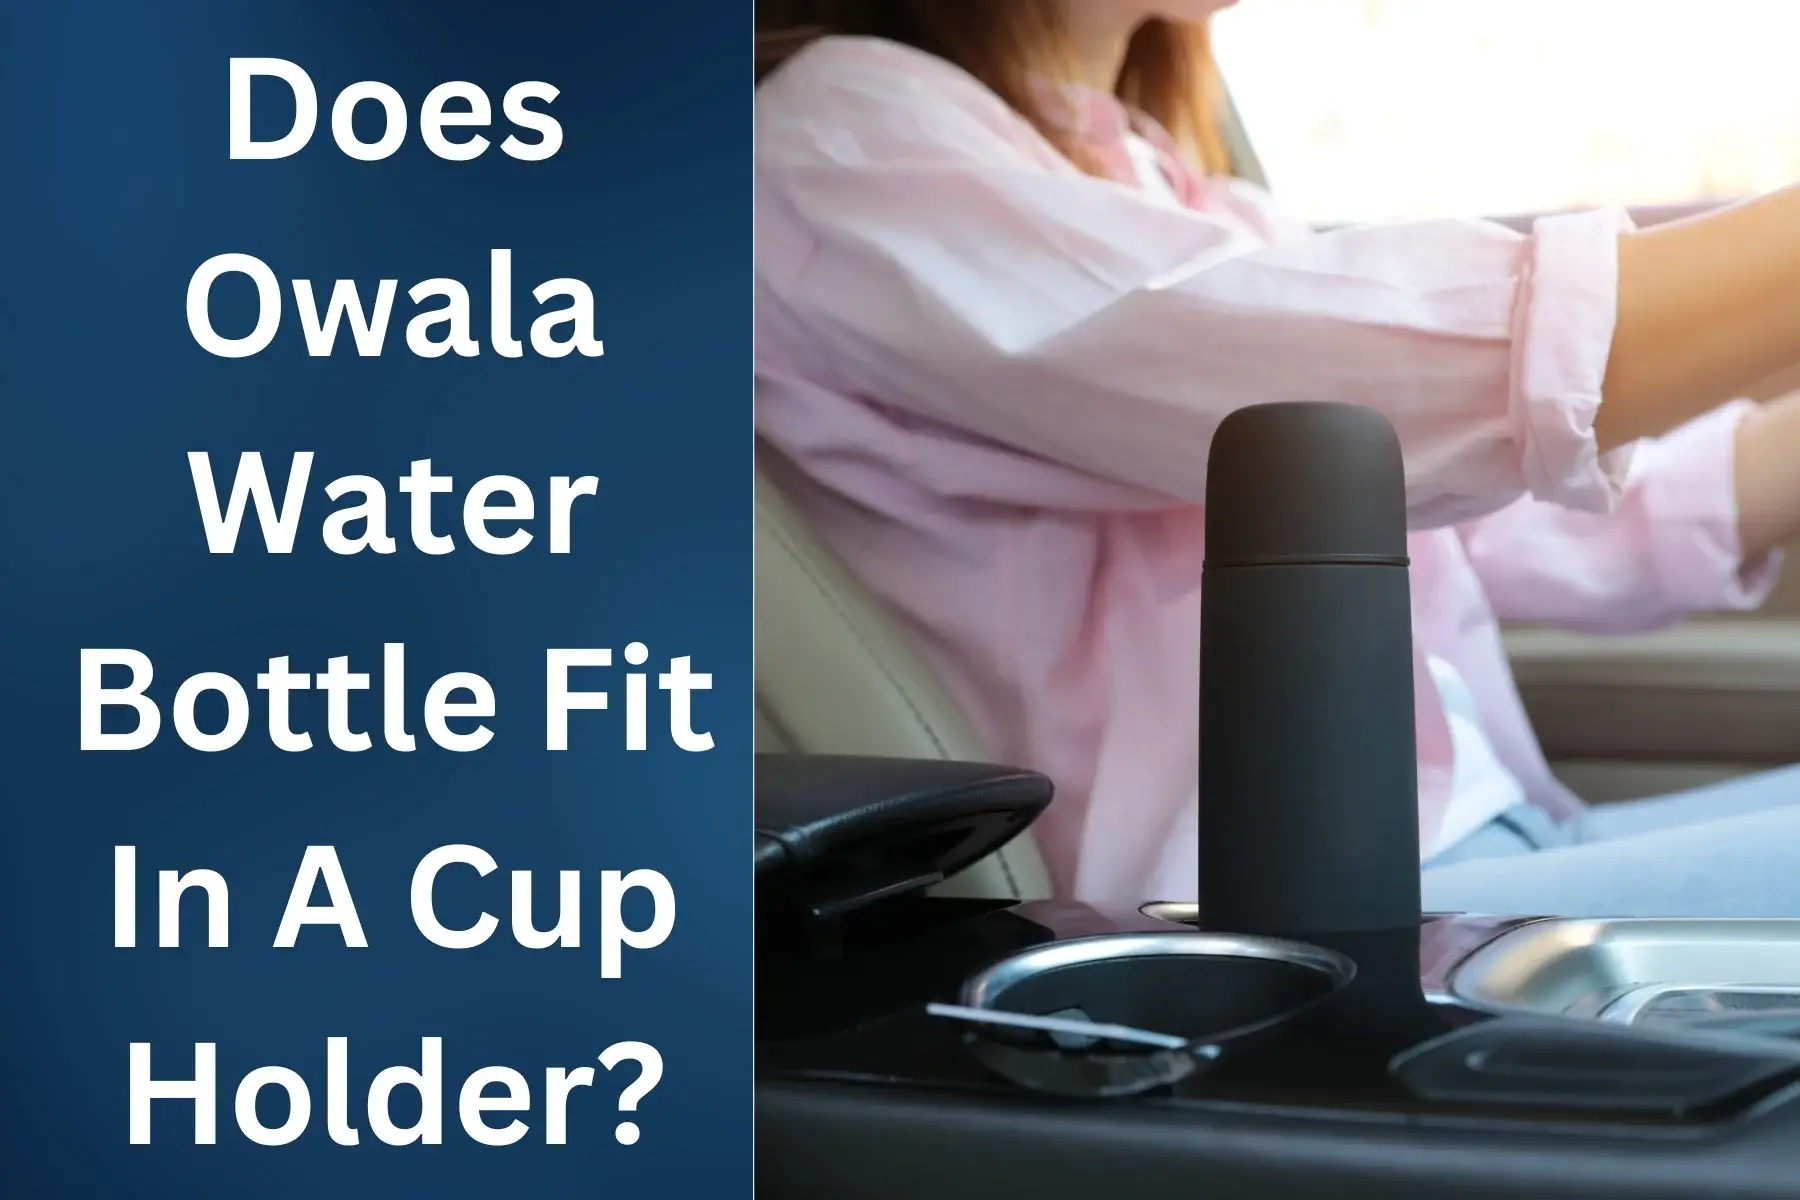 Does owala water bottle fit in cup holder?